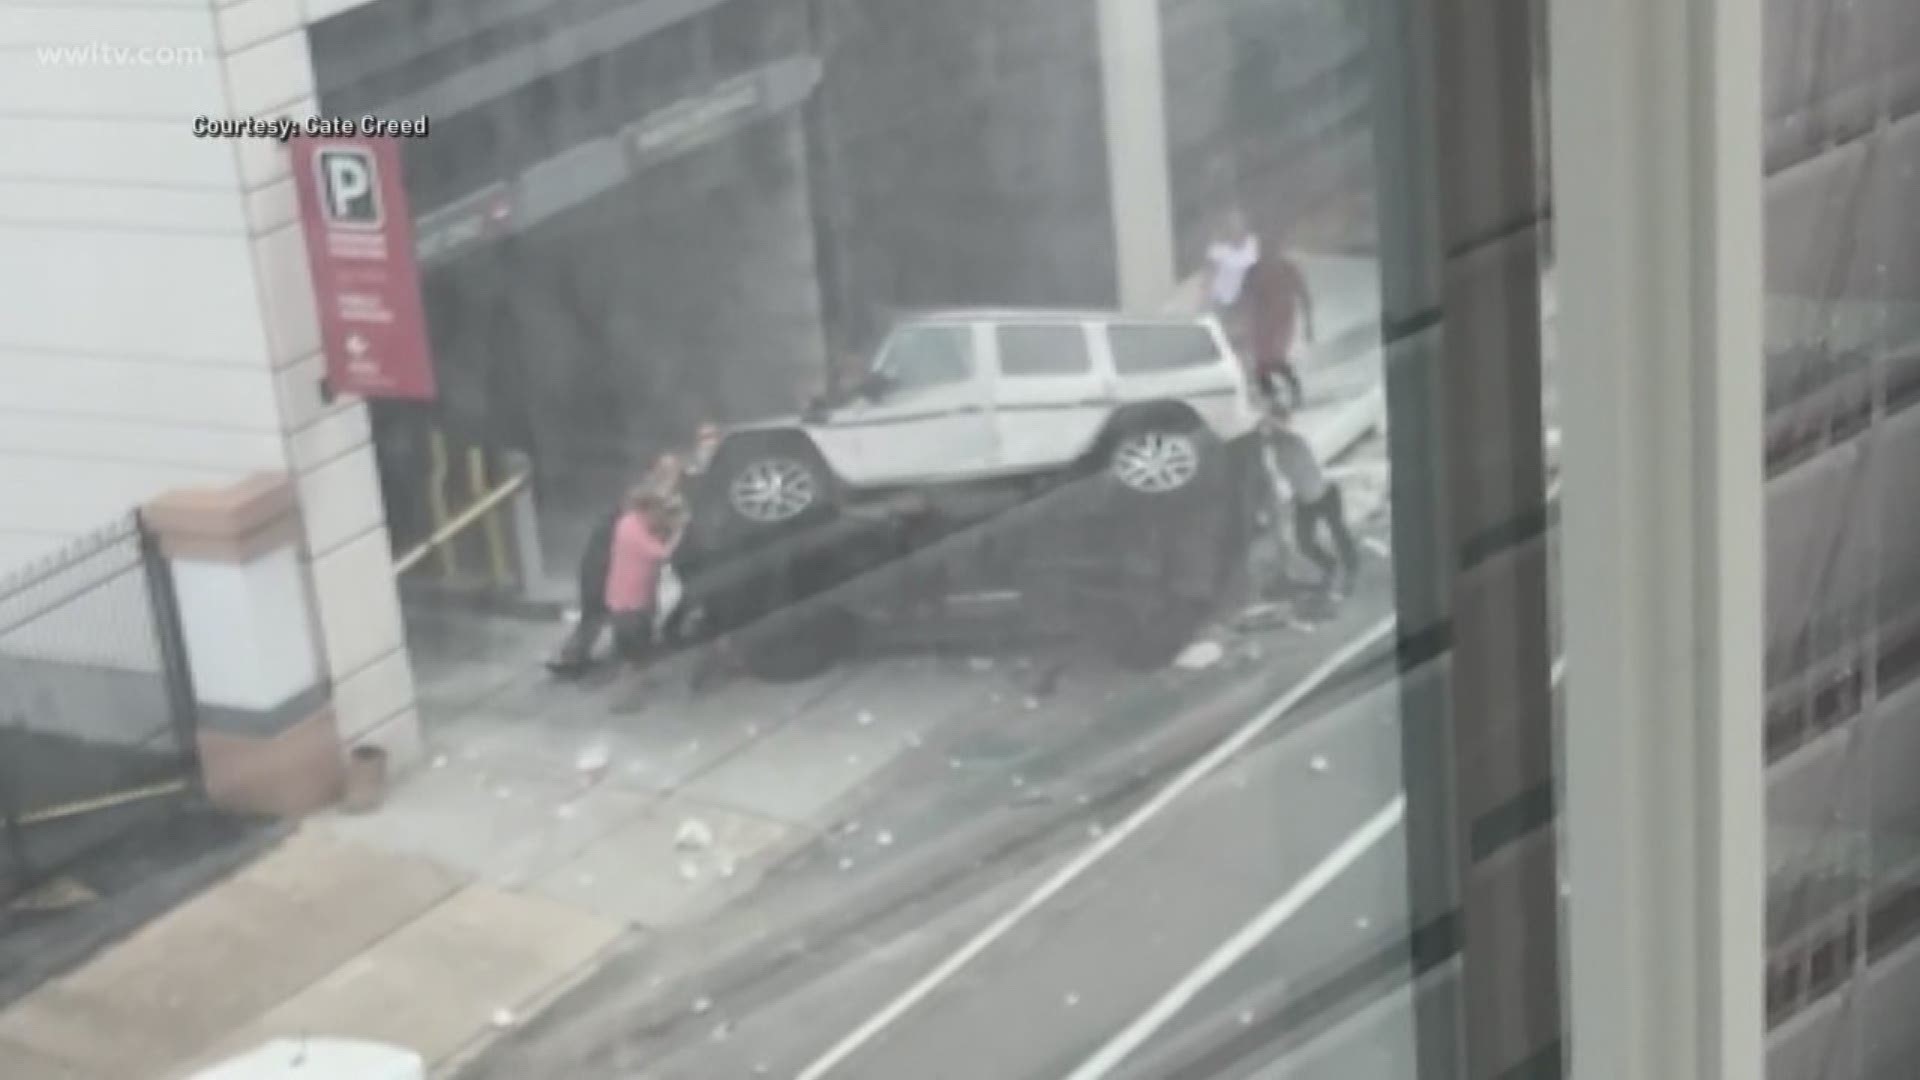 Officials said the driver of a silver Mercedes SUV drove off the fourth floor of the parking garage and landed on the street below.